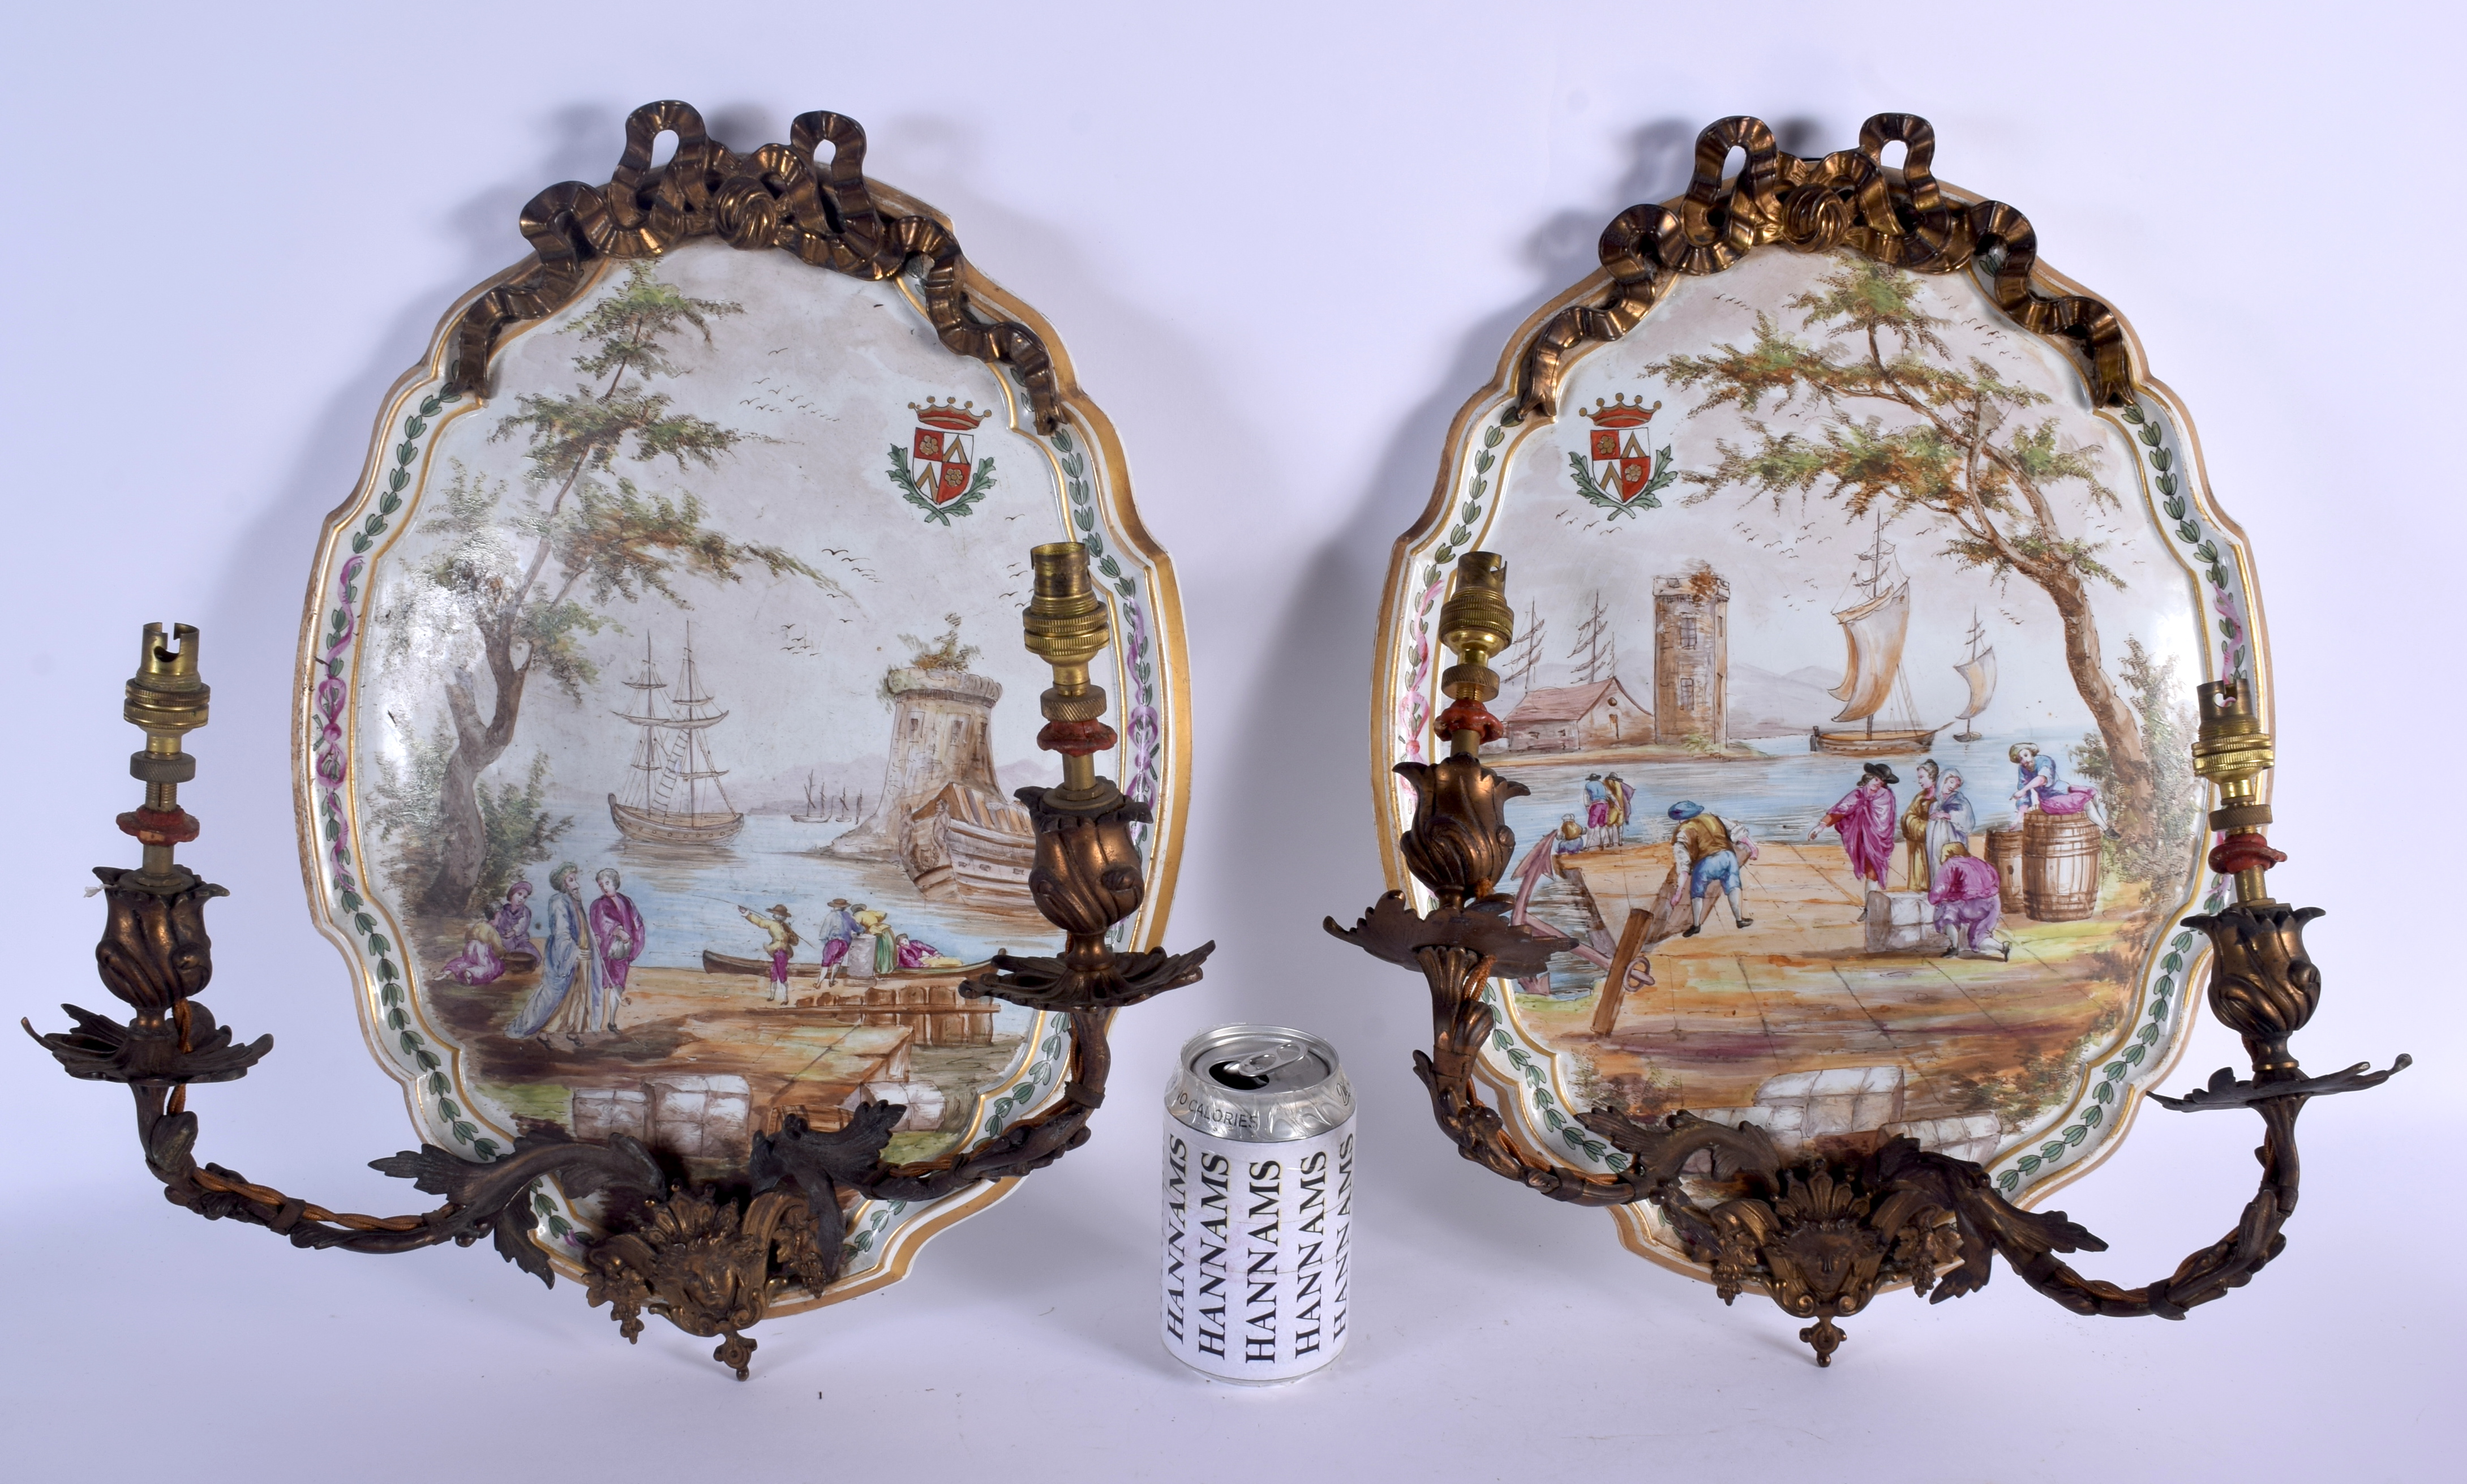 A LARGE PAIR OF 18TH/19TH CENTURY FRENCH LILLE POTTERY WALL PLAQUES painted with figures and seascap